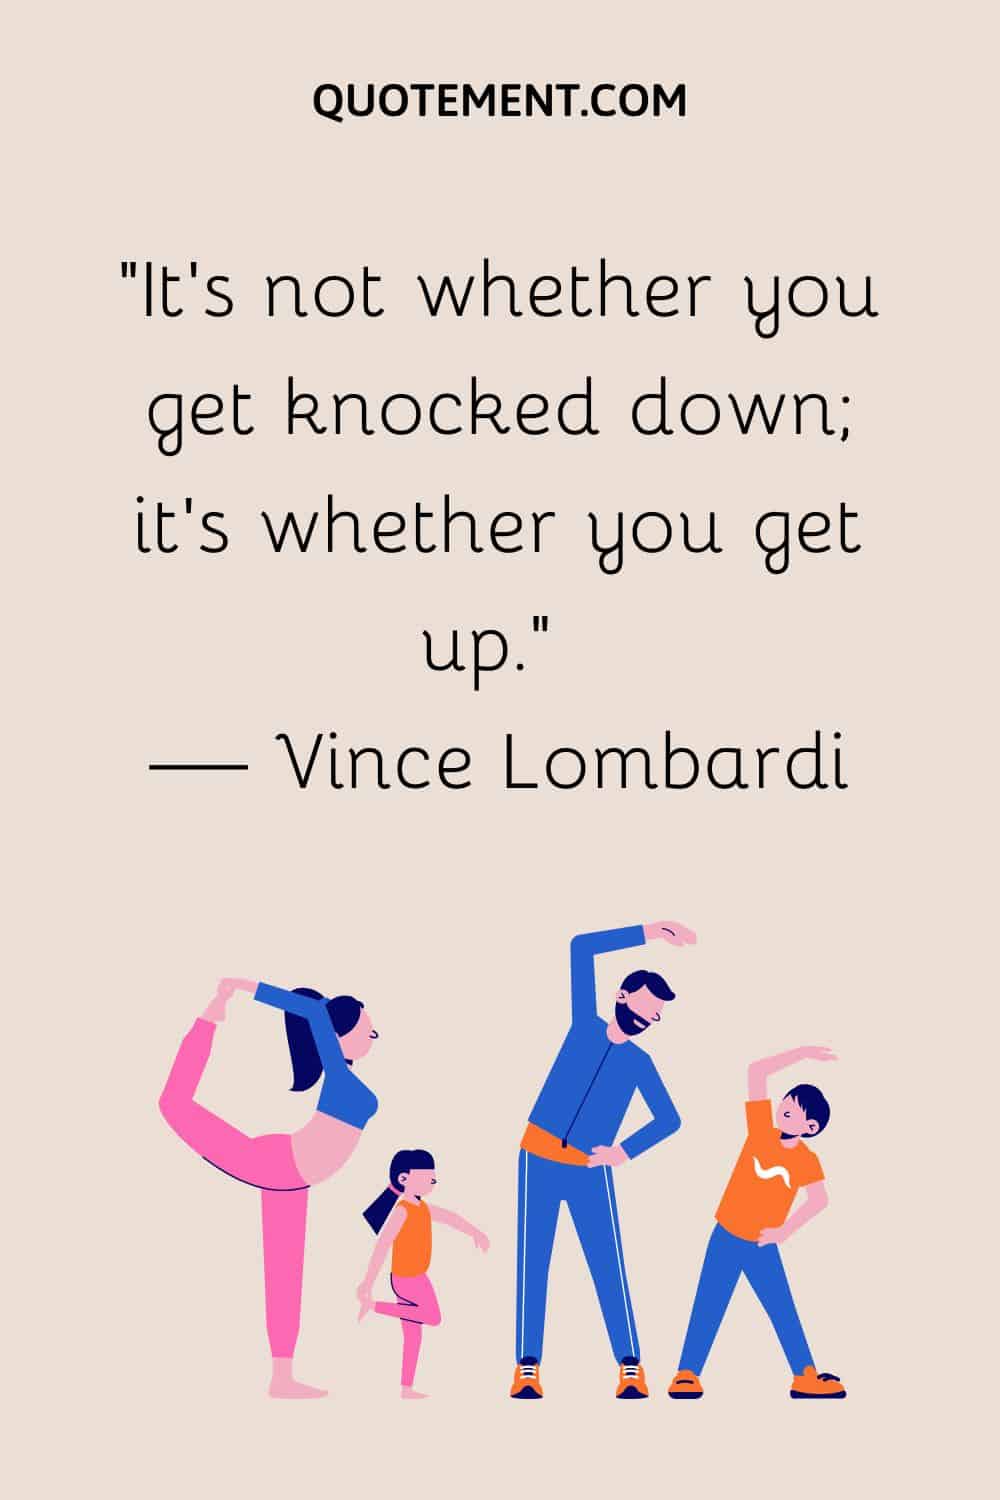 It’s not whether you get knocked down; it’s whether you get up.